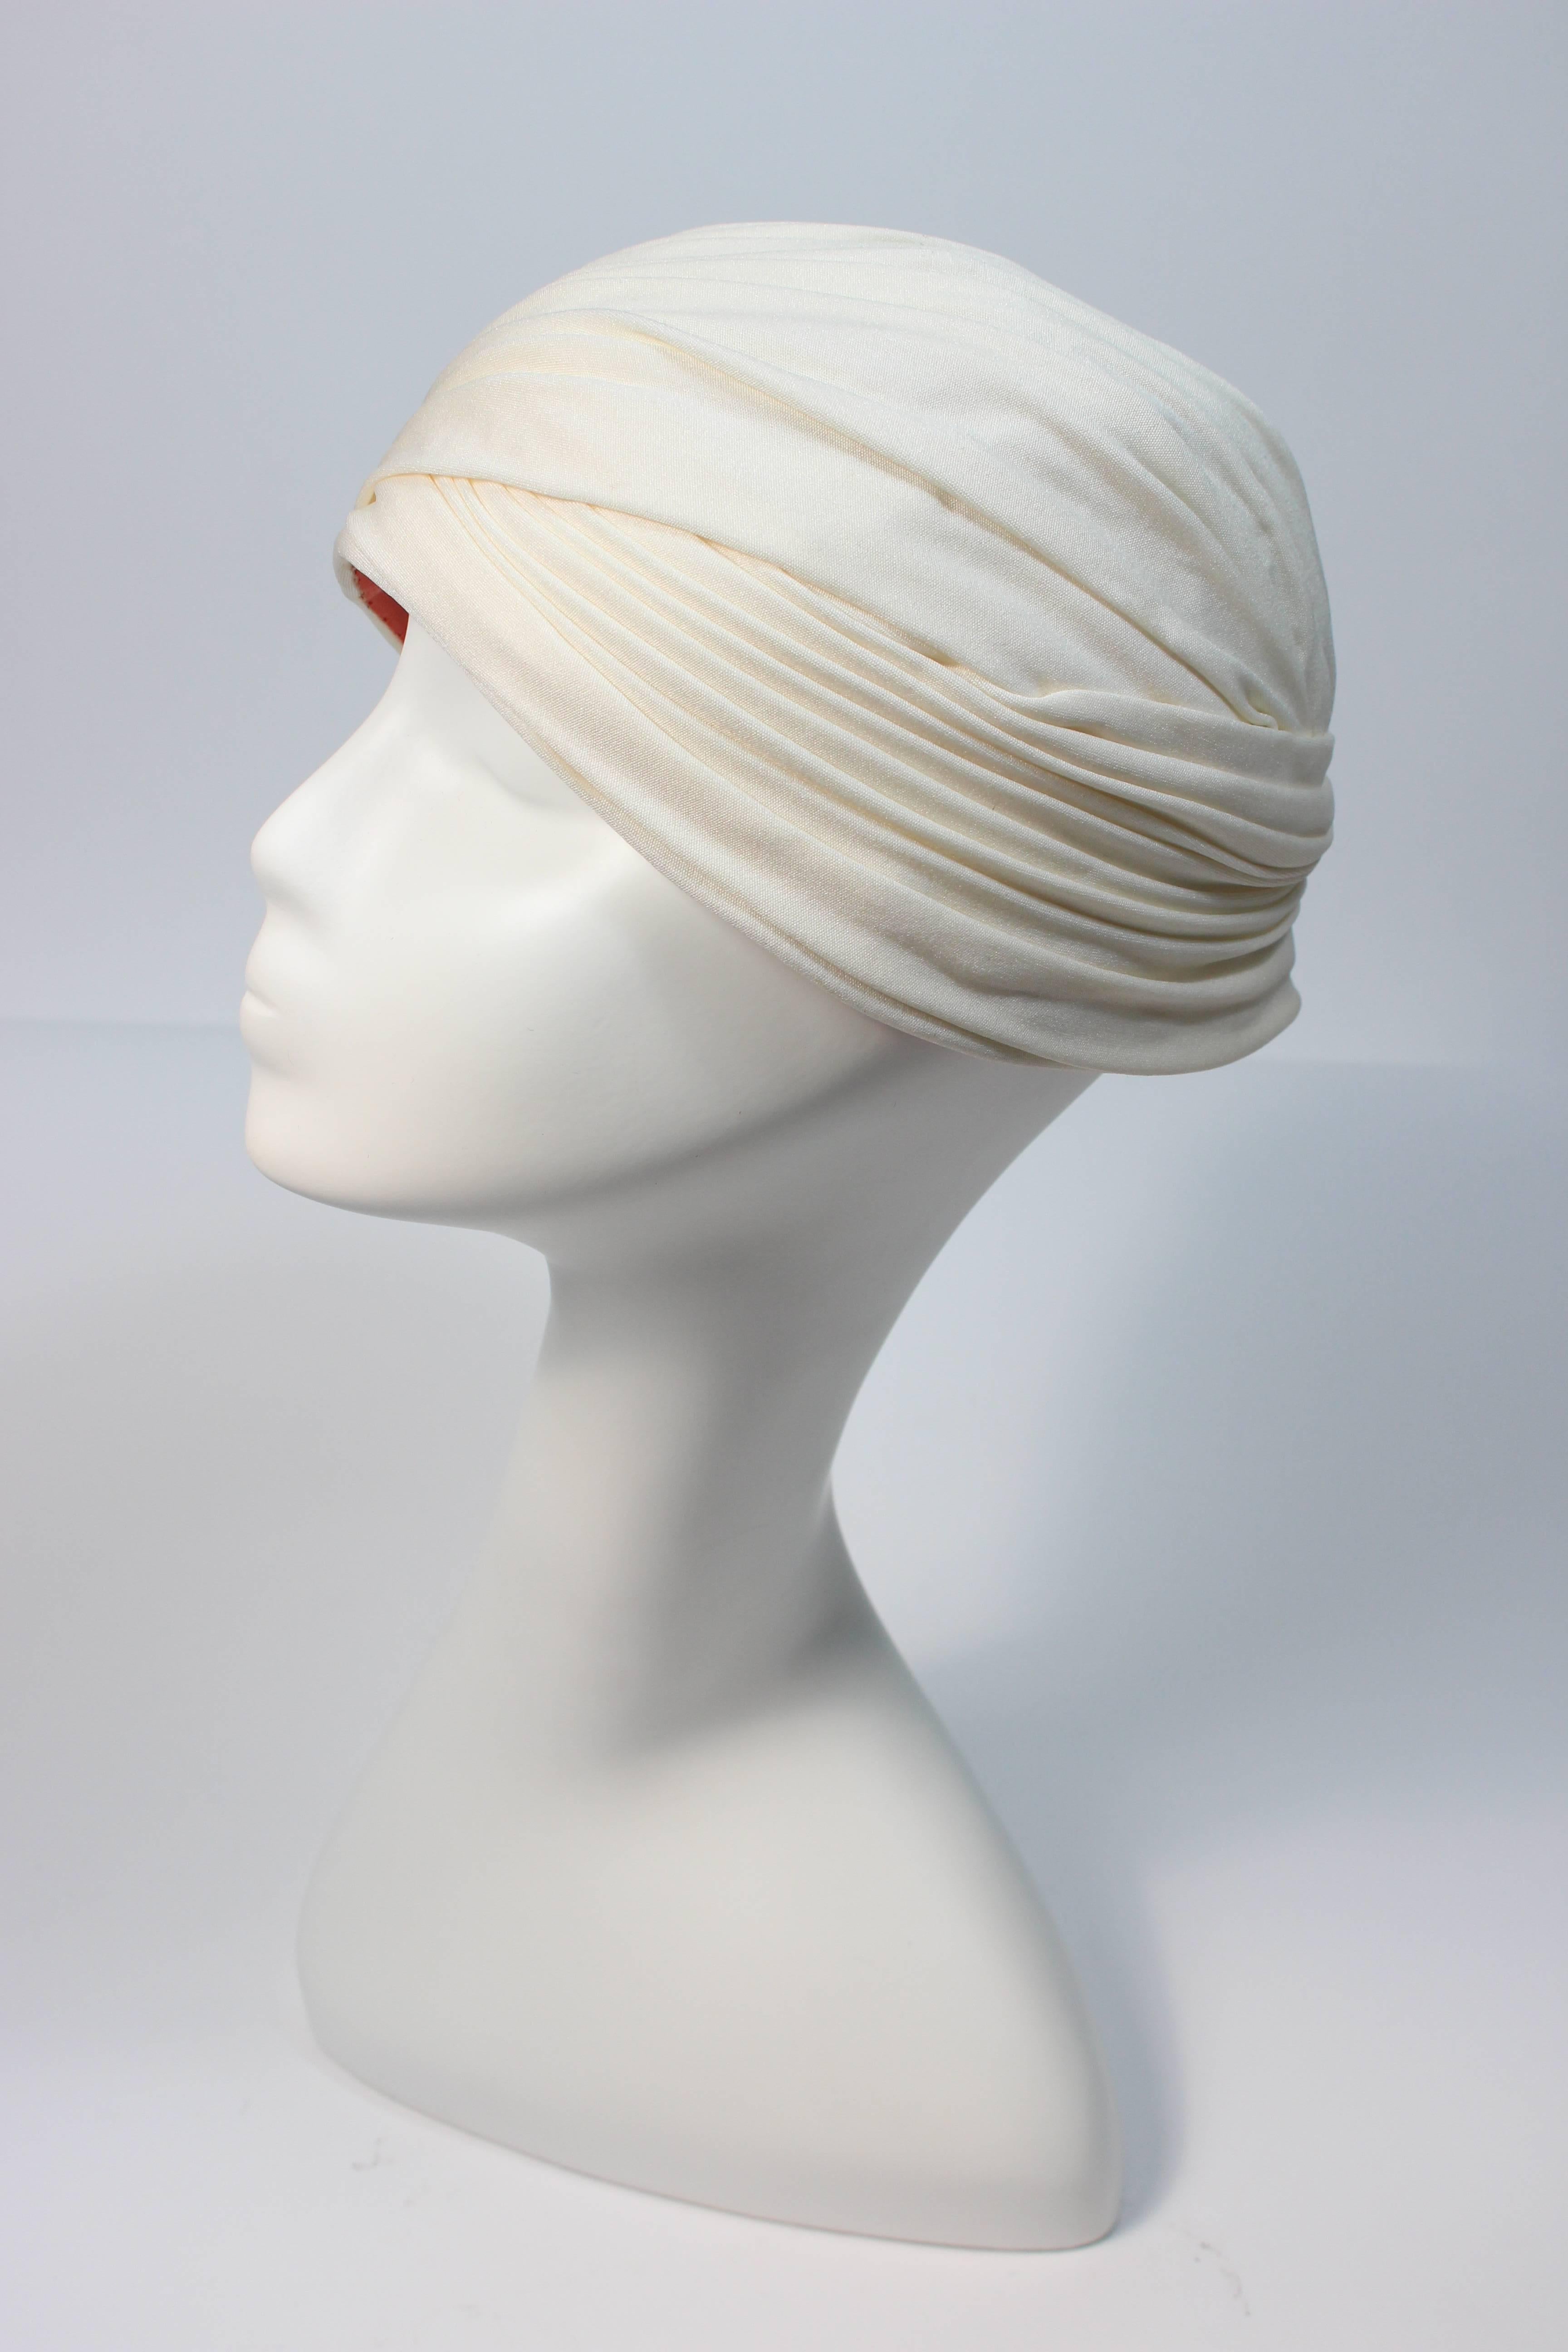 ADOLFO GIORIGO BEVERLY HILLS Ivory Turban Hat In Excellent Condition In Los Angeles, CA